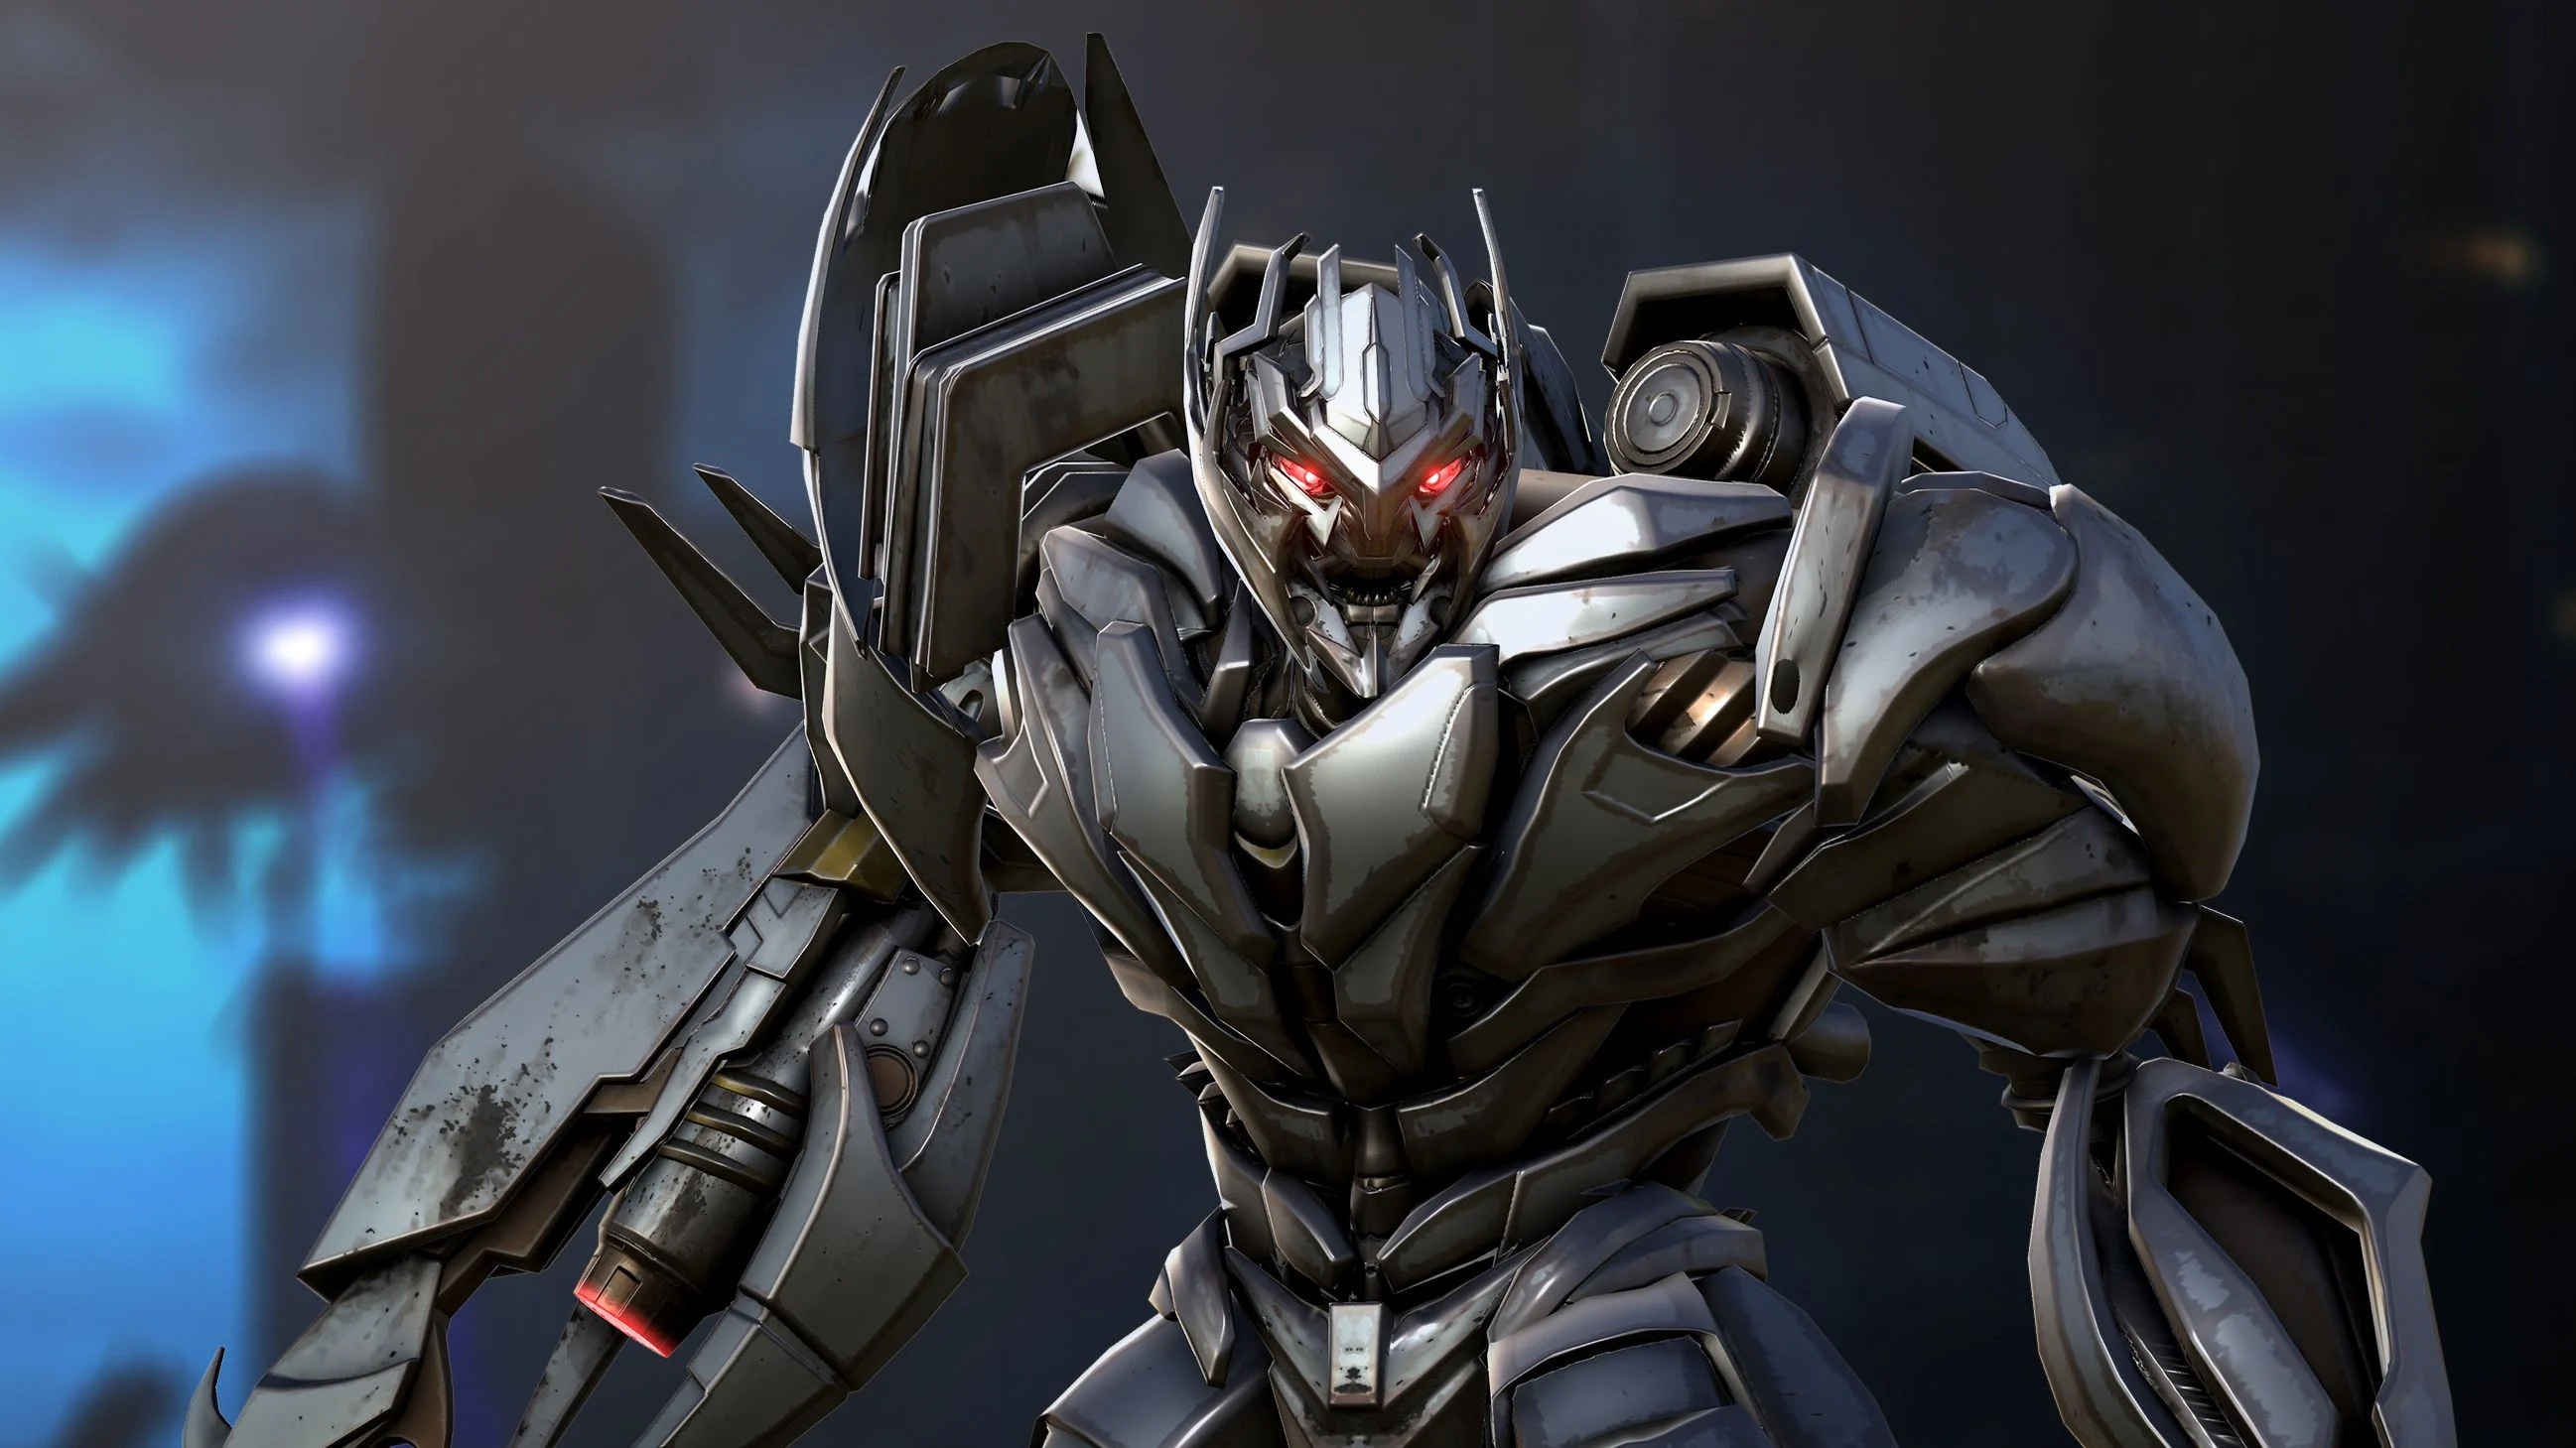 Megatron (Transformers), Top free wallpapers, Powerful antagonist, Ruthless leader, 2600x1460 HD Desktop